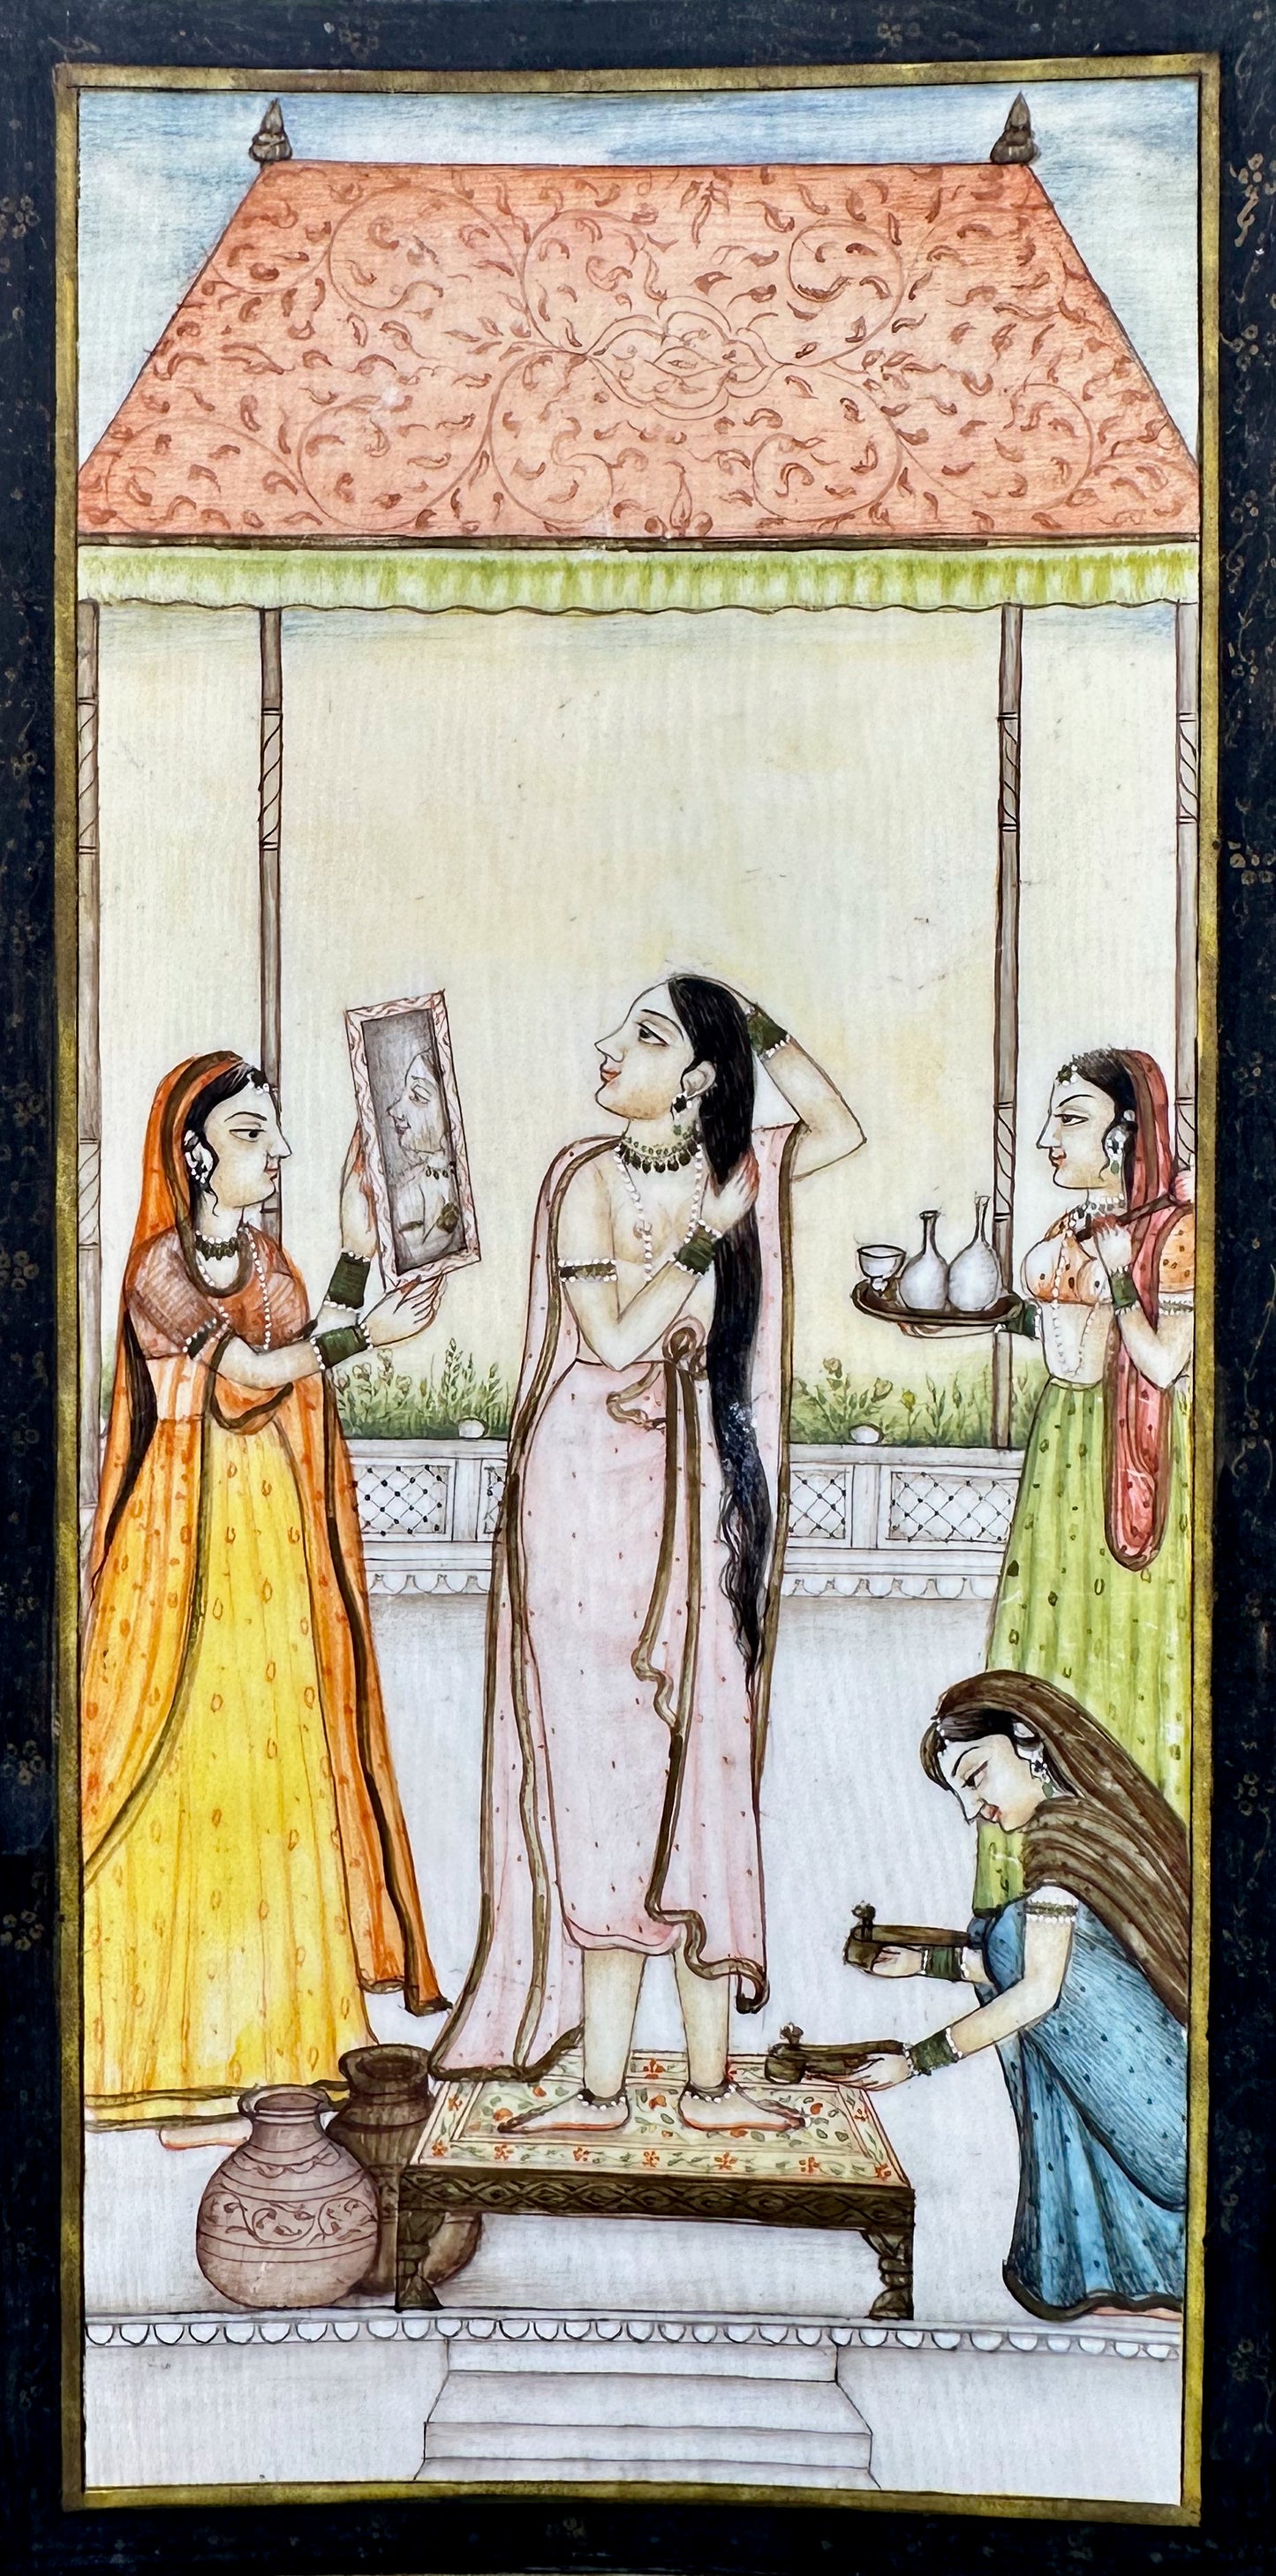 Indian Miniature Painting on Ivory of Woman Getting Dressed with Attendants (Late 19th Century) - DharBazaar